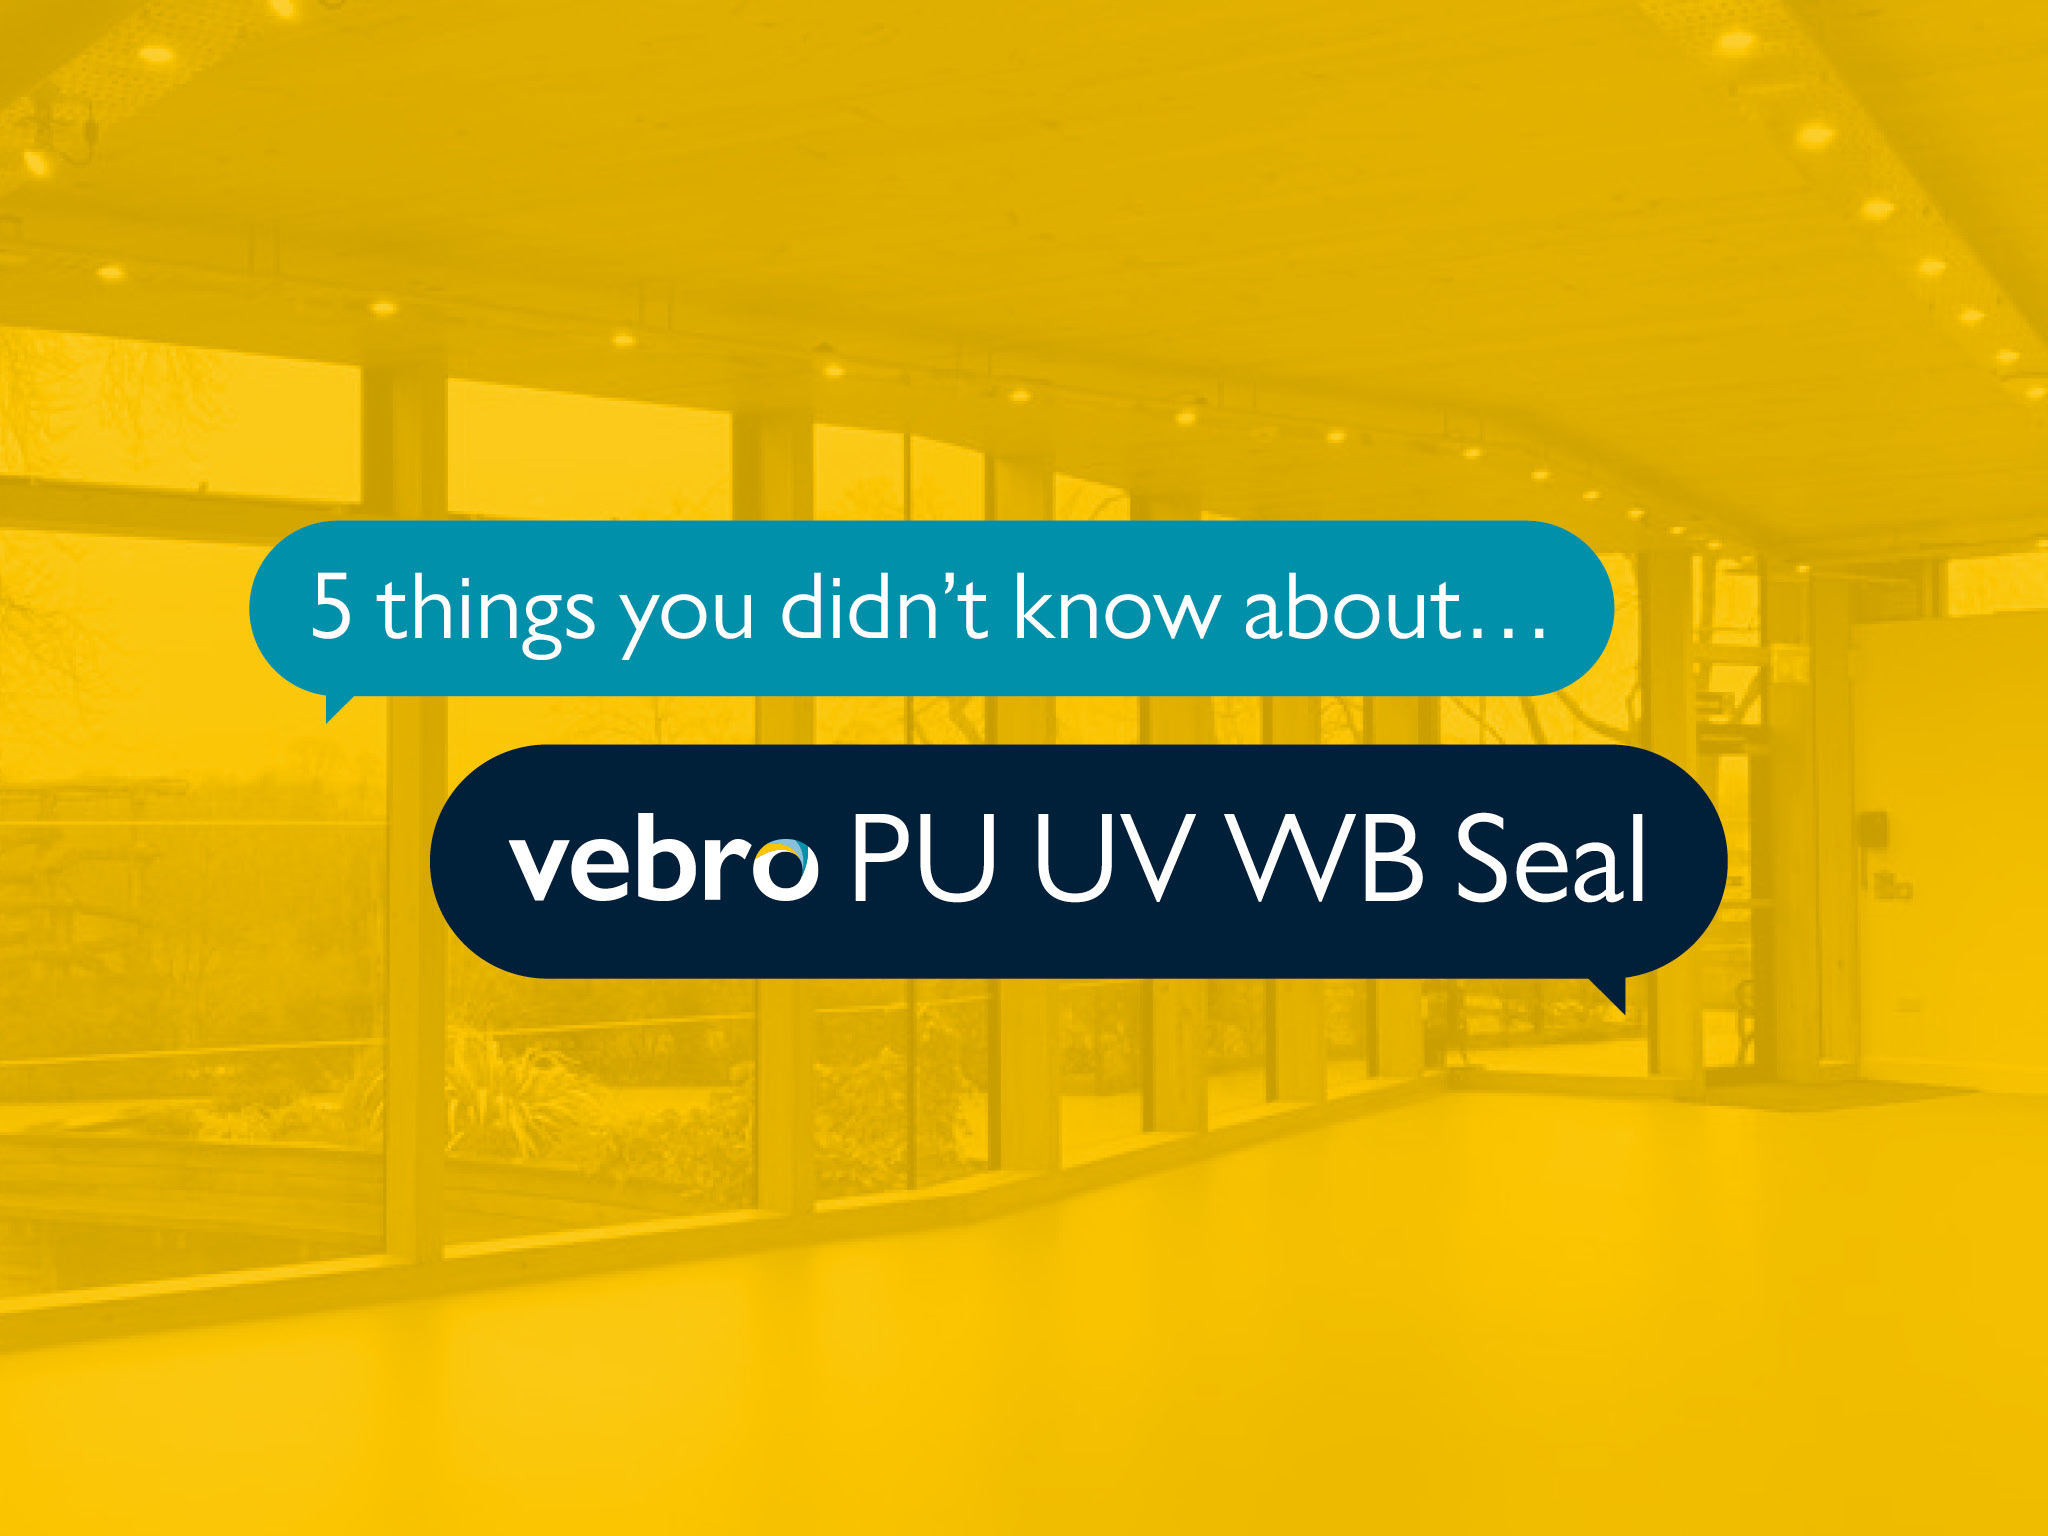 5 things you didn't know about vebro PU UV WB Seal